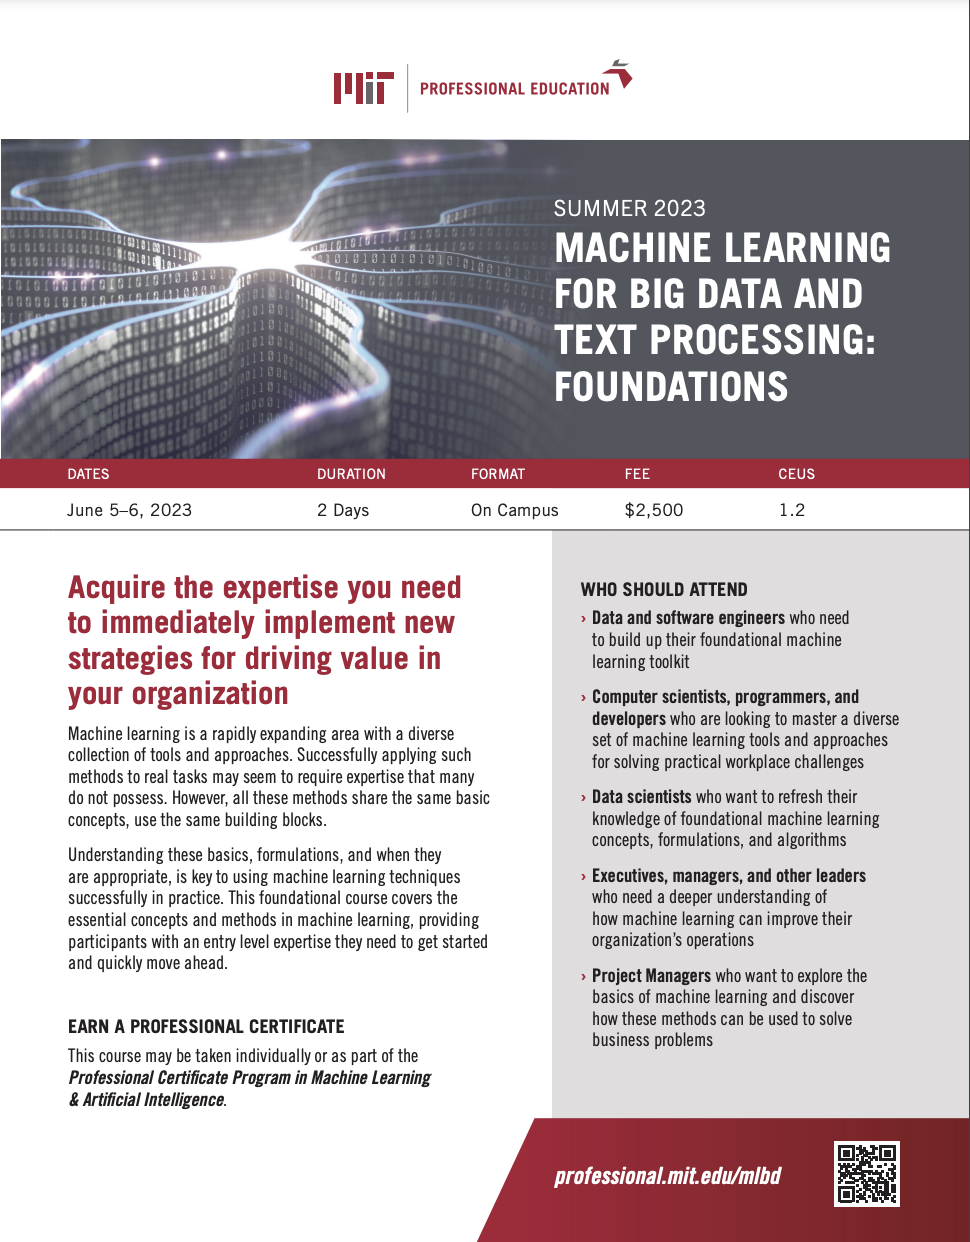 Machine Learning for Big Data and Text Processing: Foundations - Brochure Image